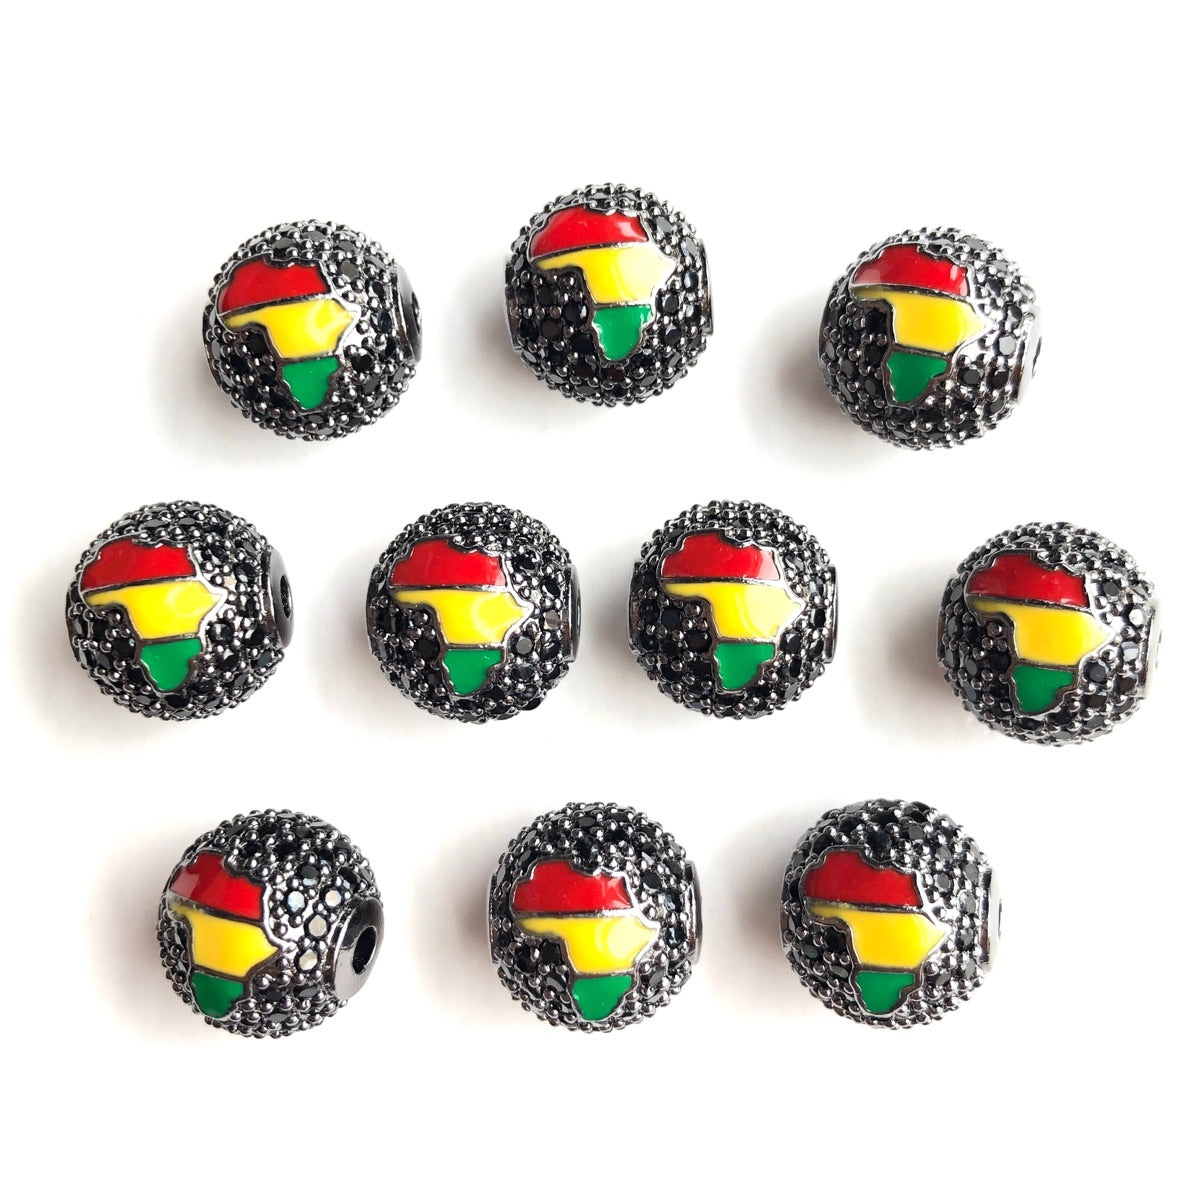 10pcs/lot 12mm CZ Paved Red Yellow Green Enamel Africa Map Ball Spacers Beads for Black History Black on Black CZ Paved Spacers Ball Beads Juneteenth & Black History Month Awareness New Spacers Arrivals Charms Beads Beyond